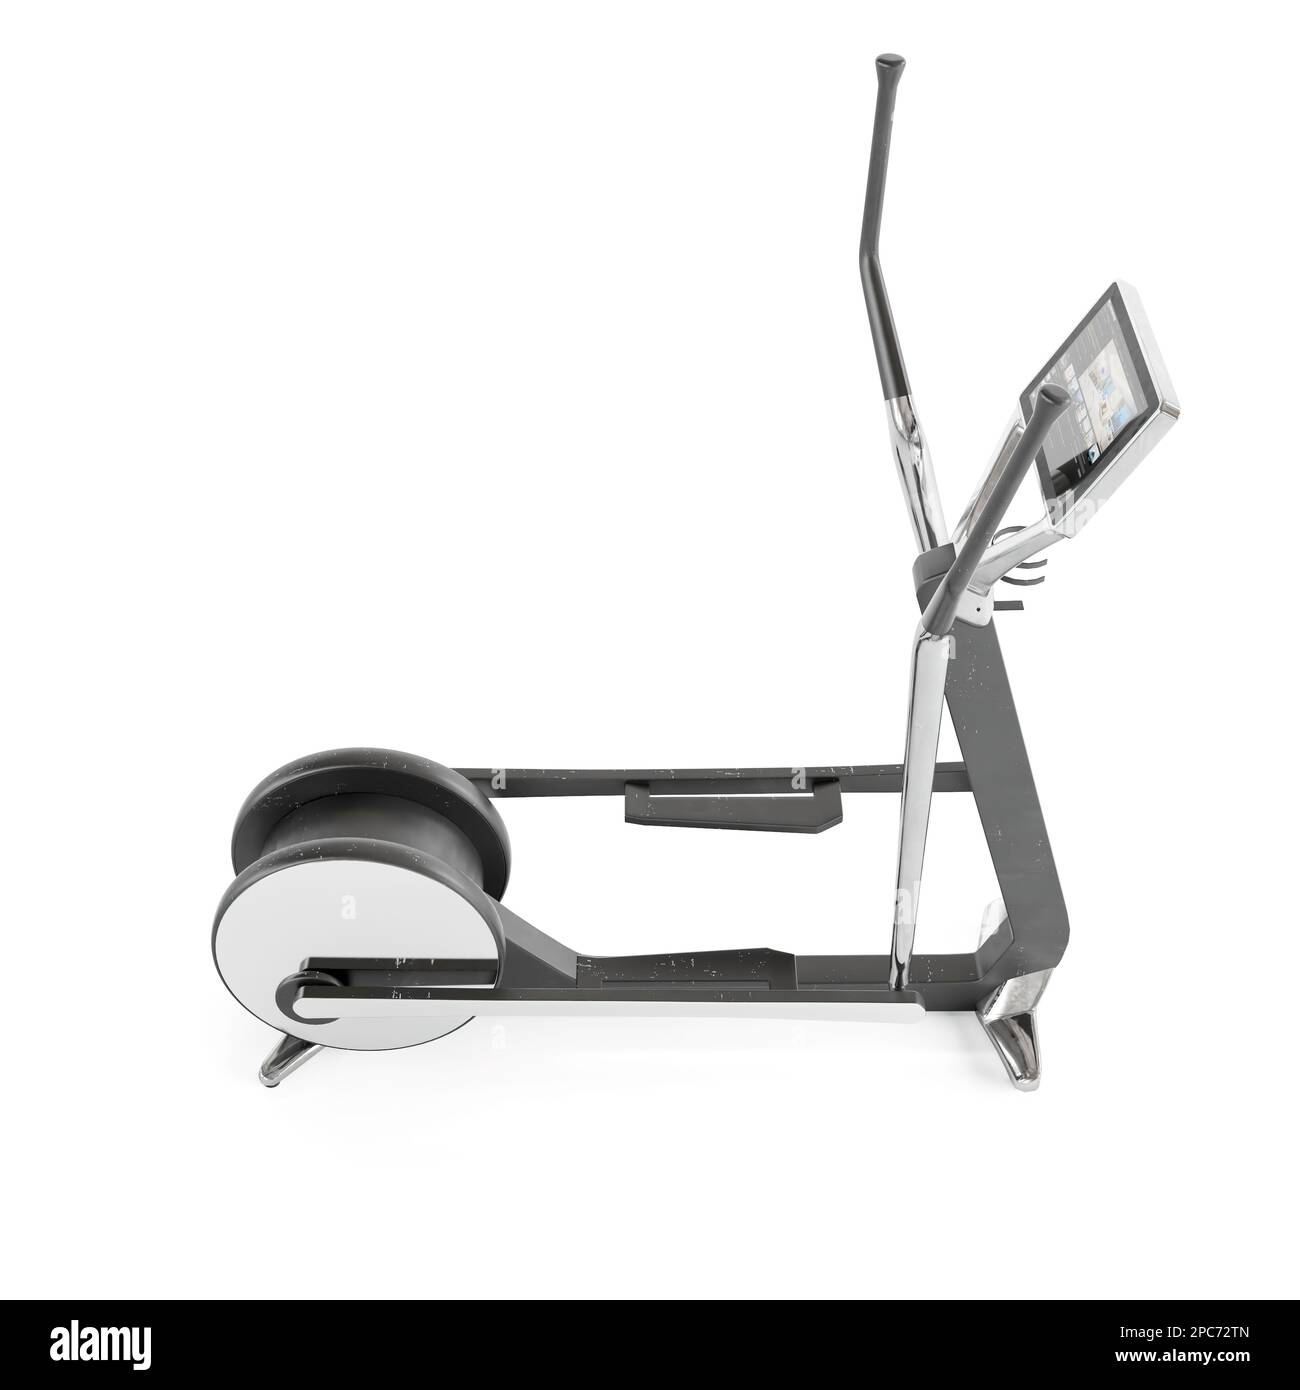 3D rendering of new upright exercise Elliptical machine Stock Photo